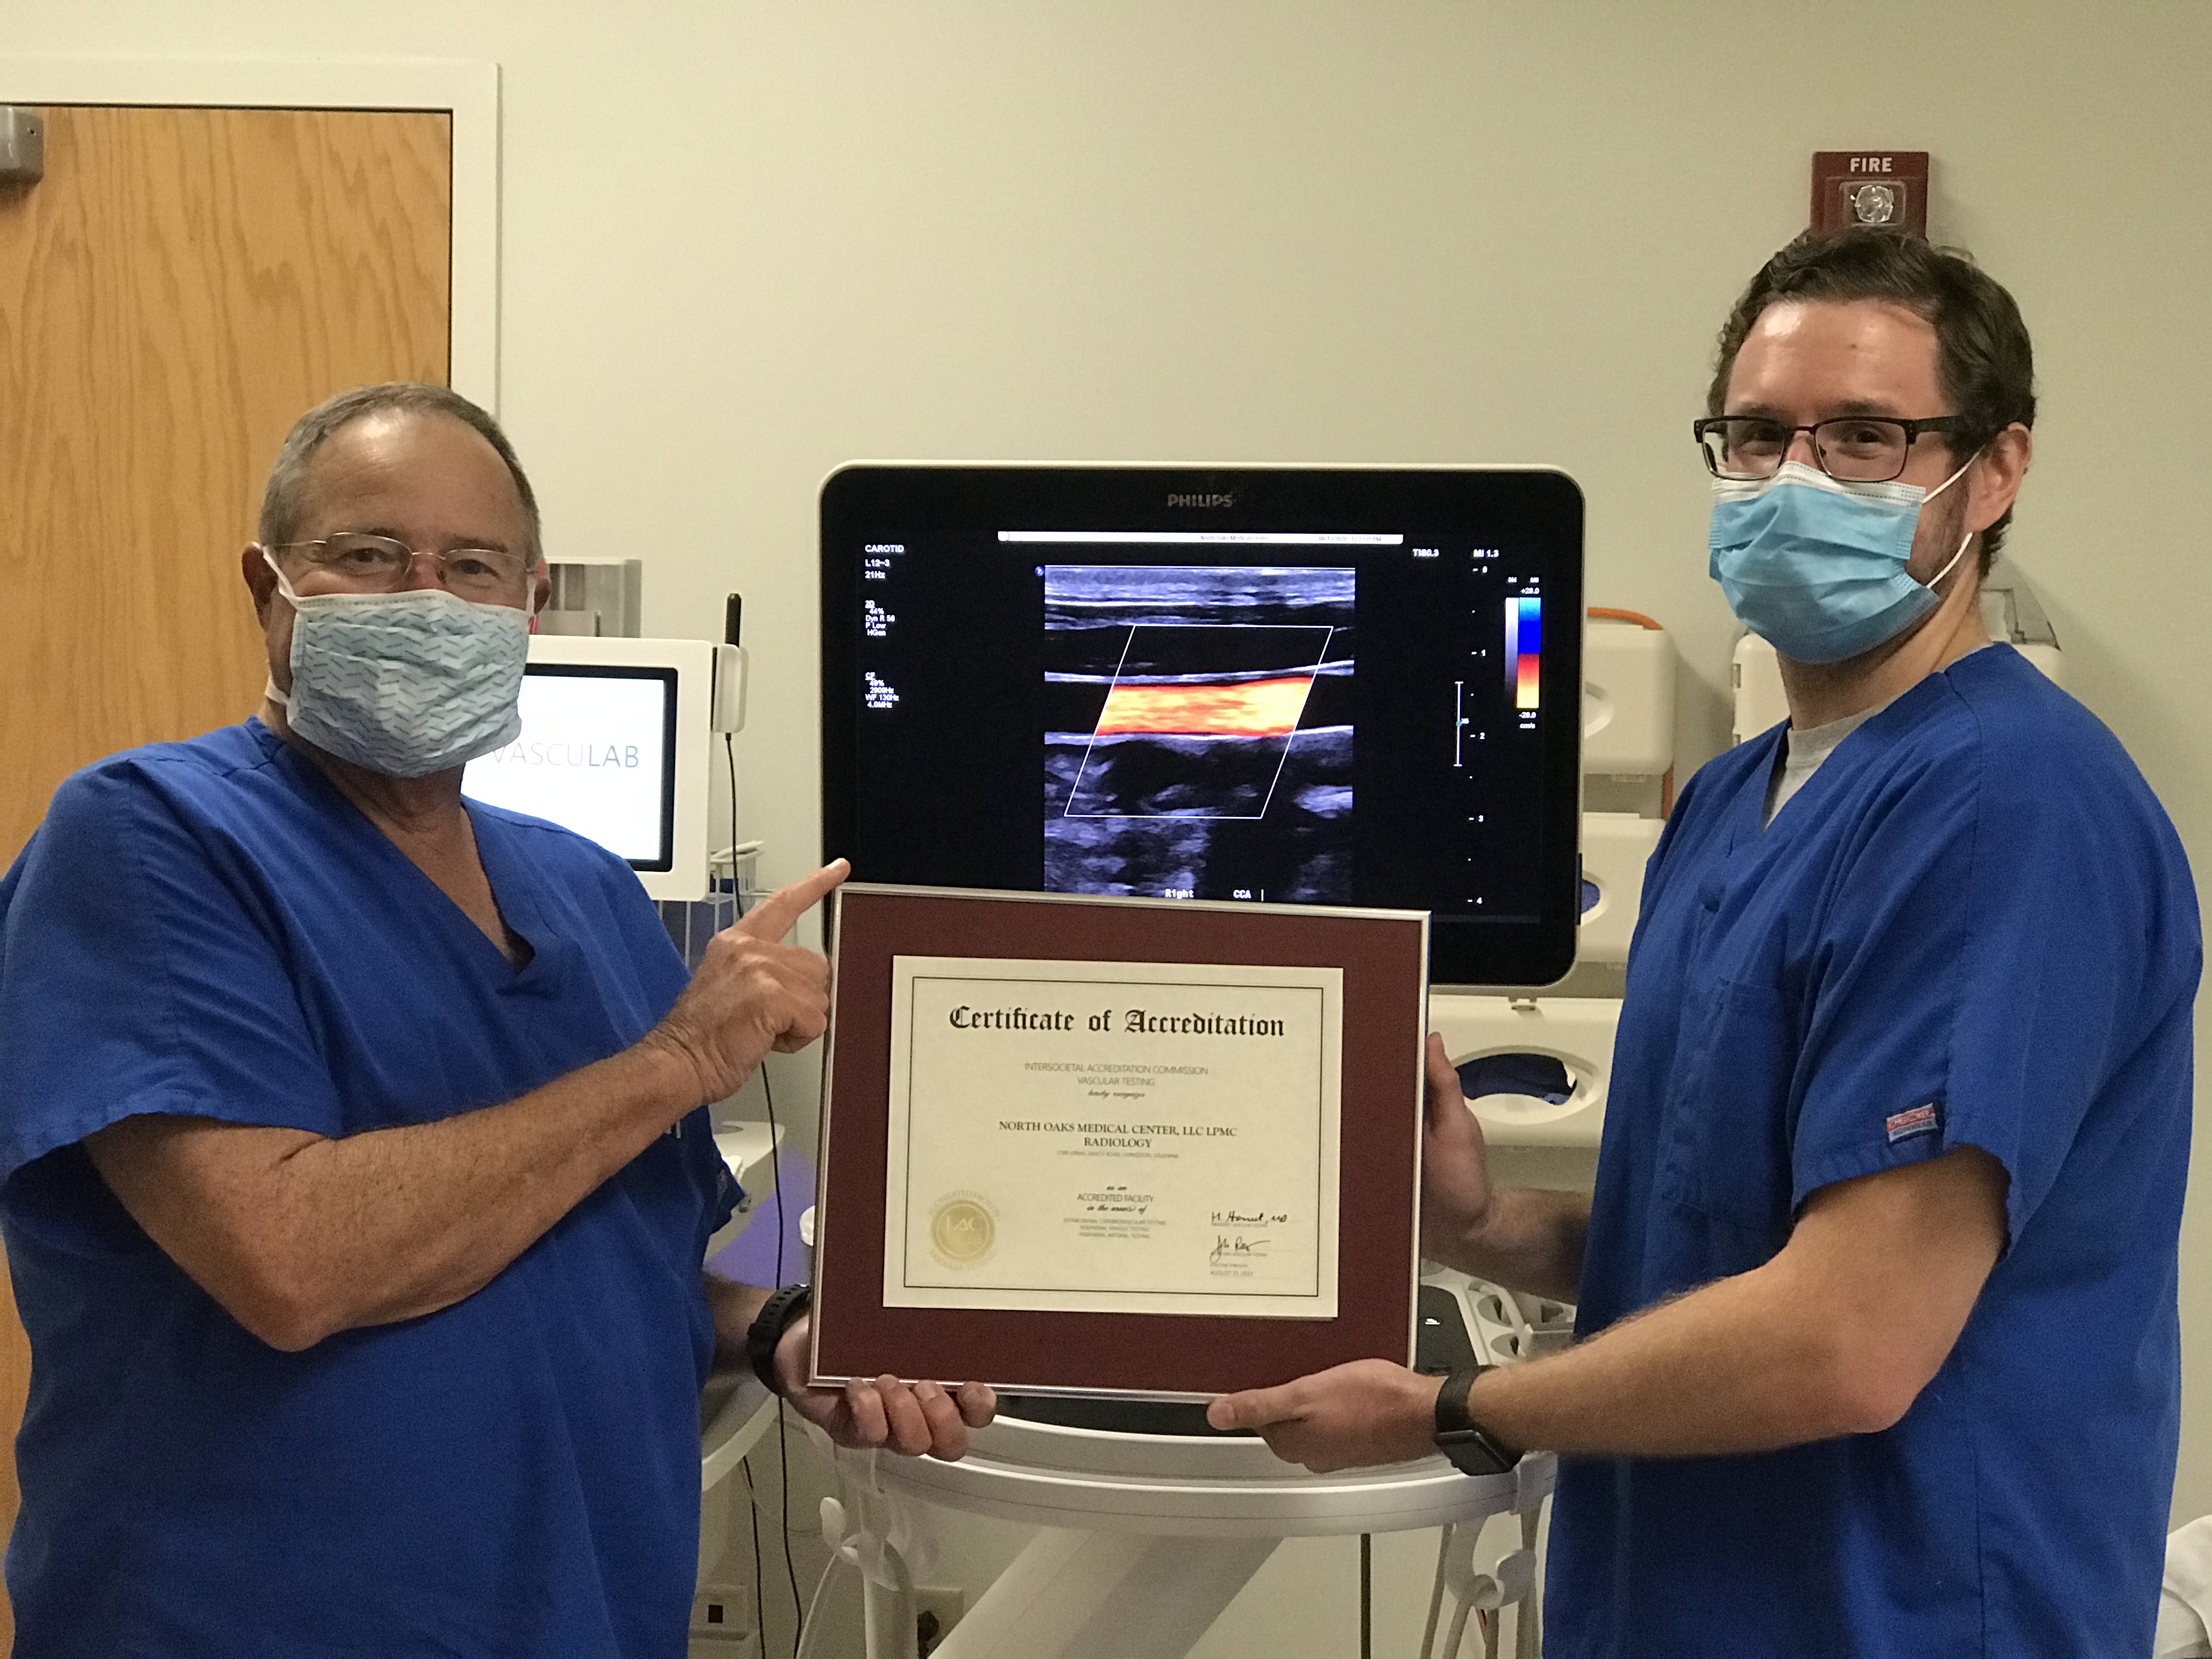 From left, the Ultrasound team at North Oaks-Livingston Parish Medical Complex includes Ultrasound Technologist Tom Ozio and Supervisor Matthew Peralta.